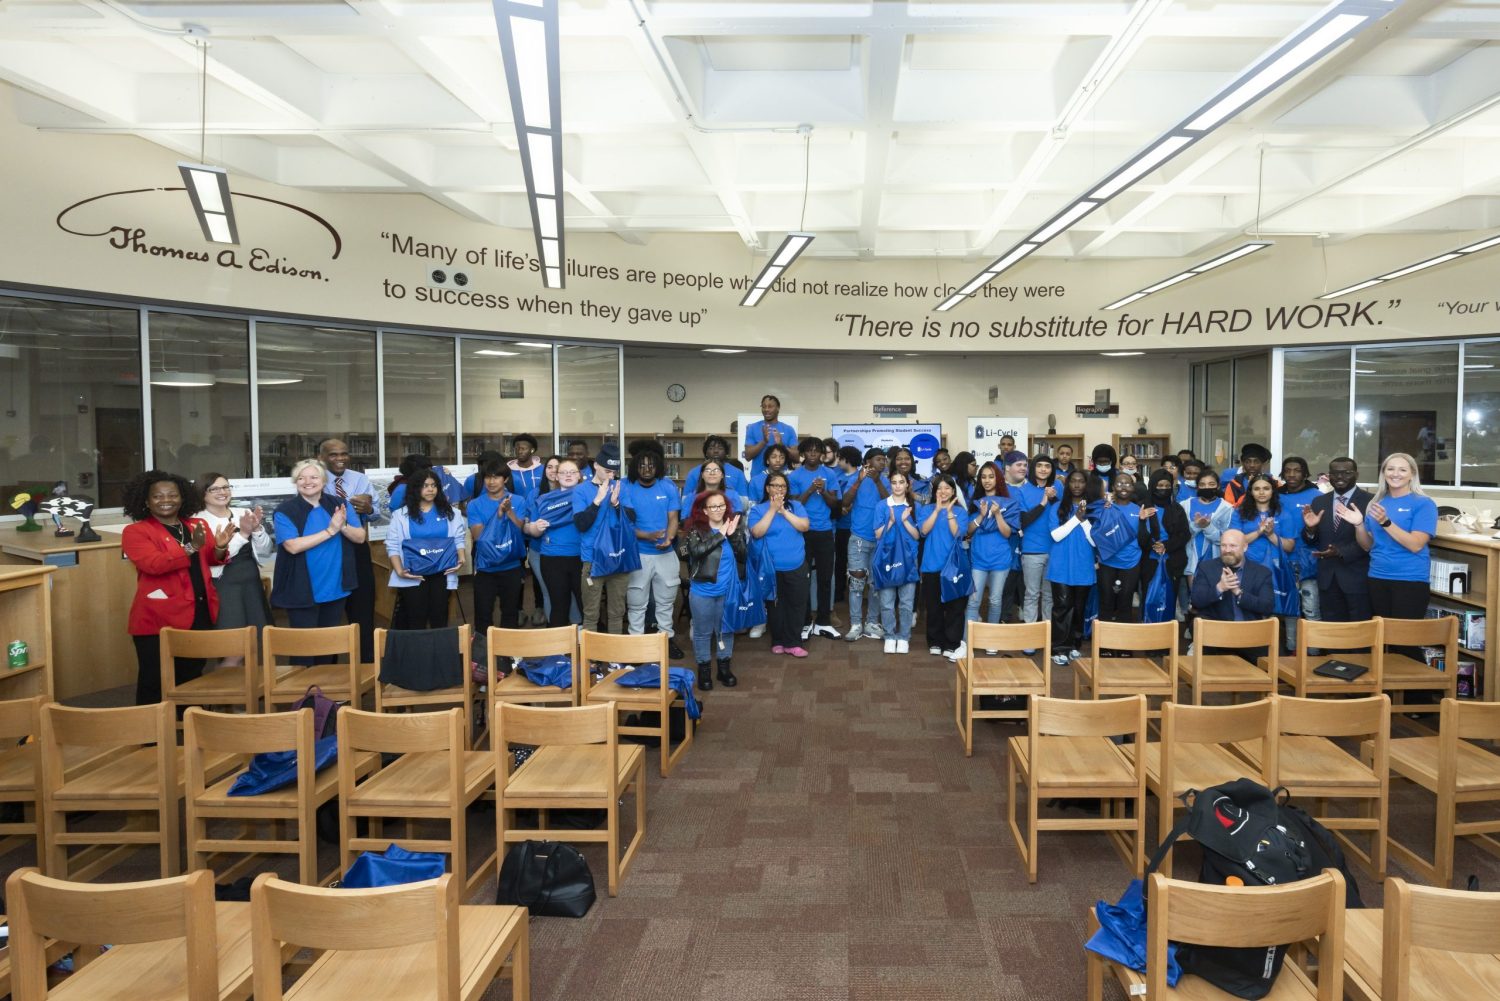 Group photo showing students wearing blue Li-Cycle t-shirts and holding blue Li-Cycle tote bags containing donated laptops.